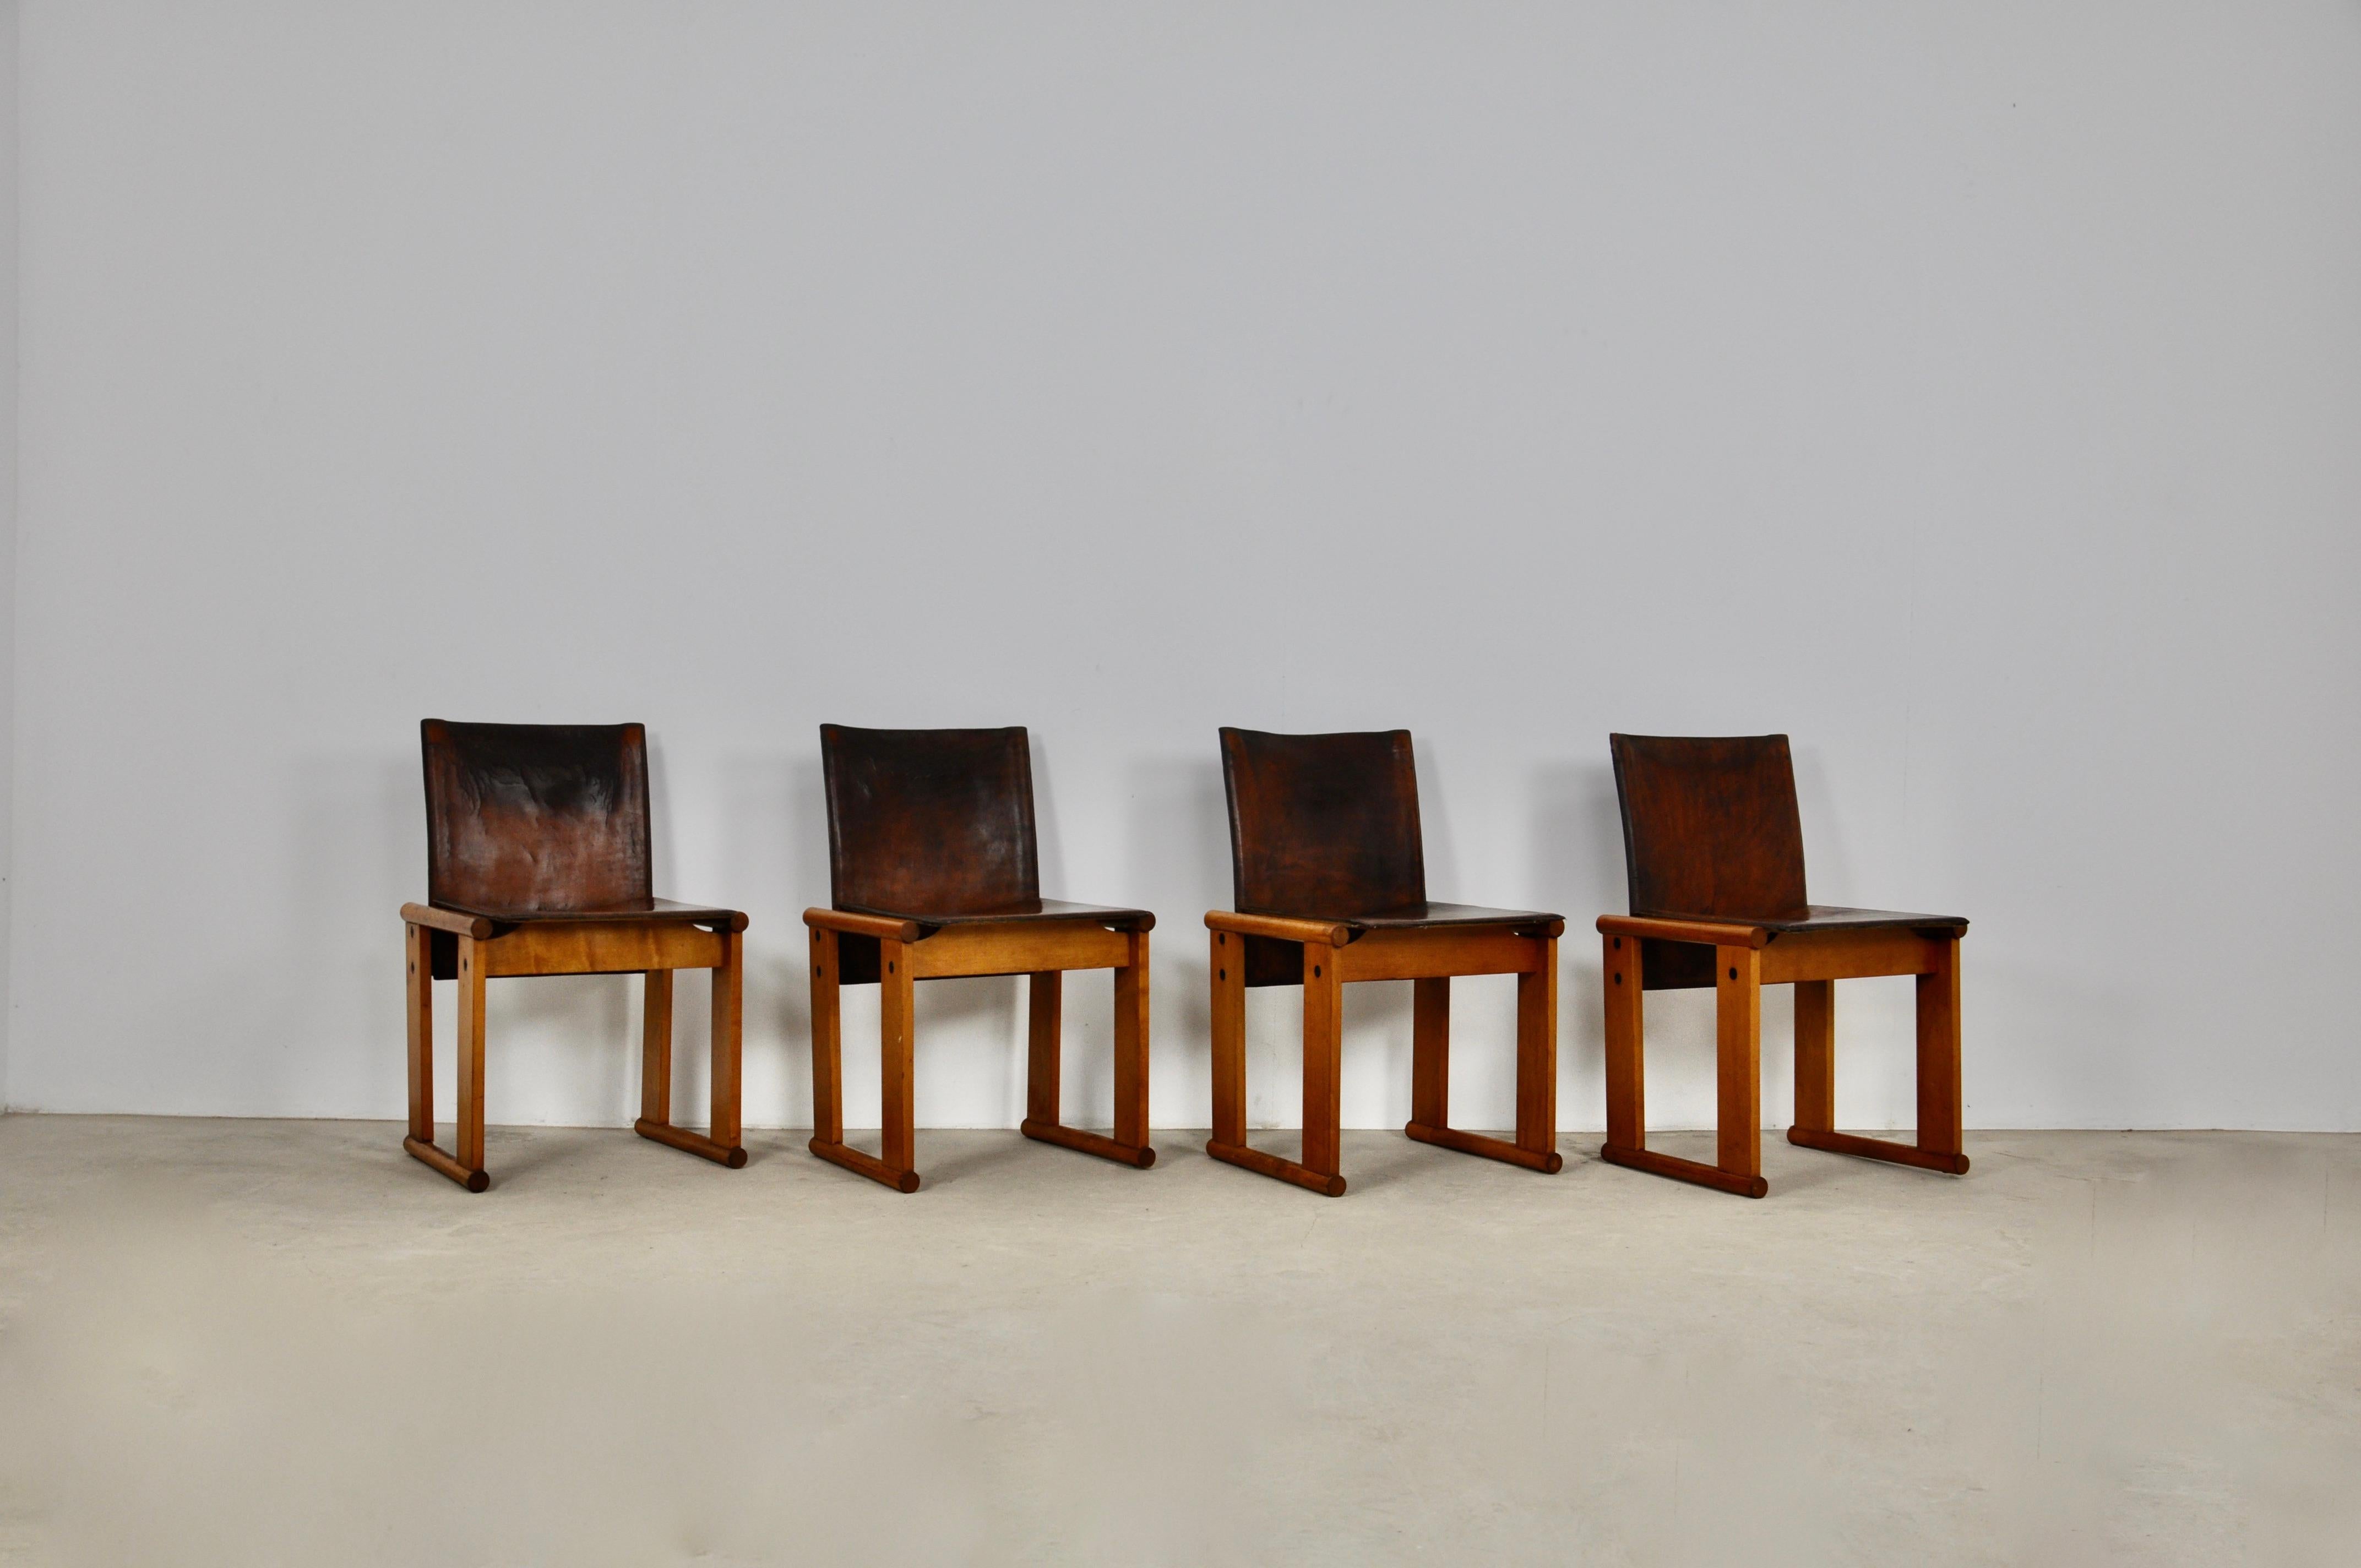 Set of 4 chairs in wood and leather in brown color. Wear on the leather and restoration (see photo. Seat height: 45cm.